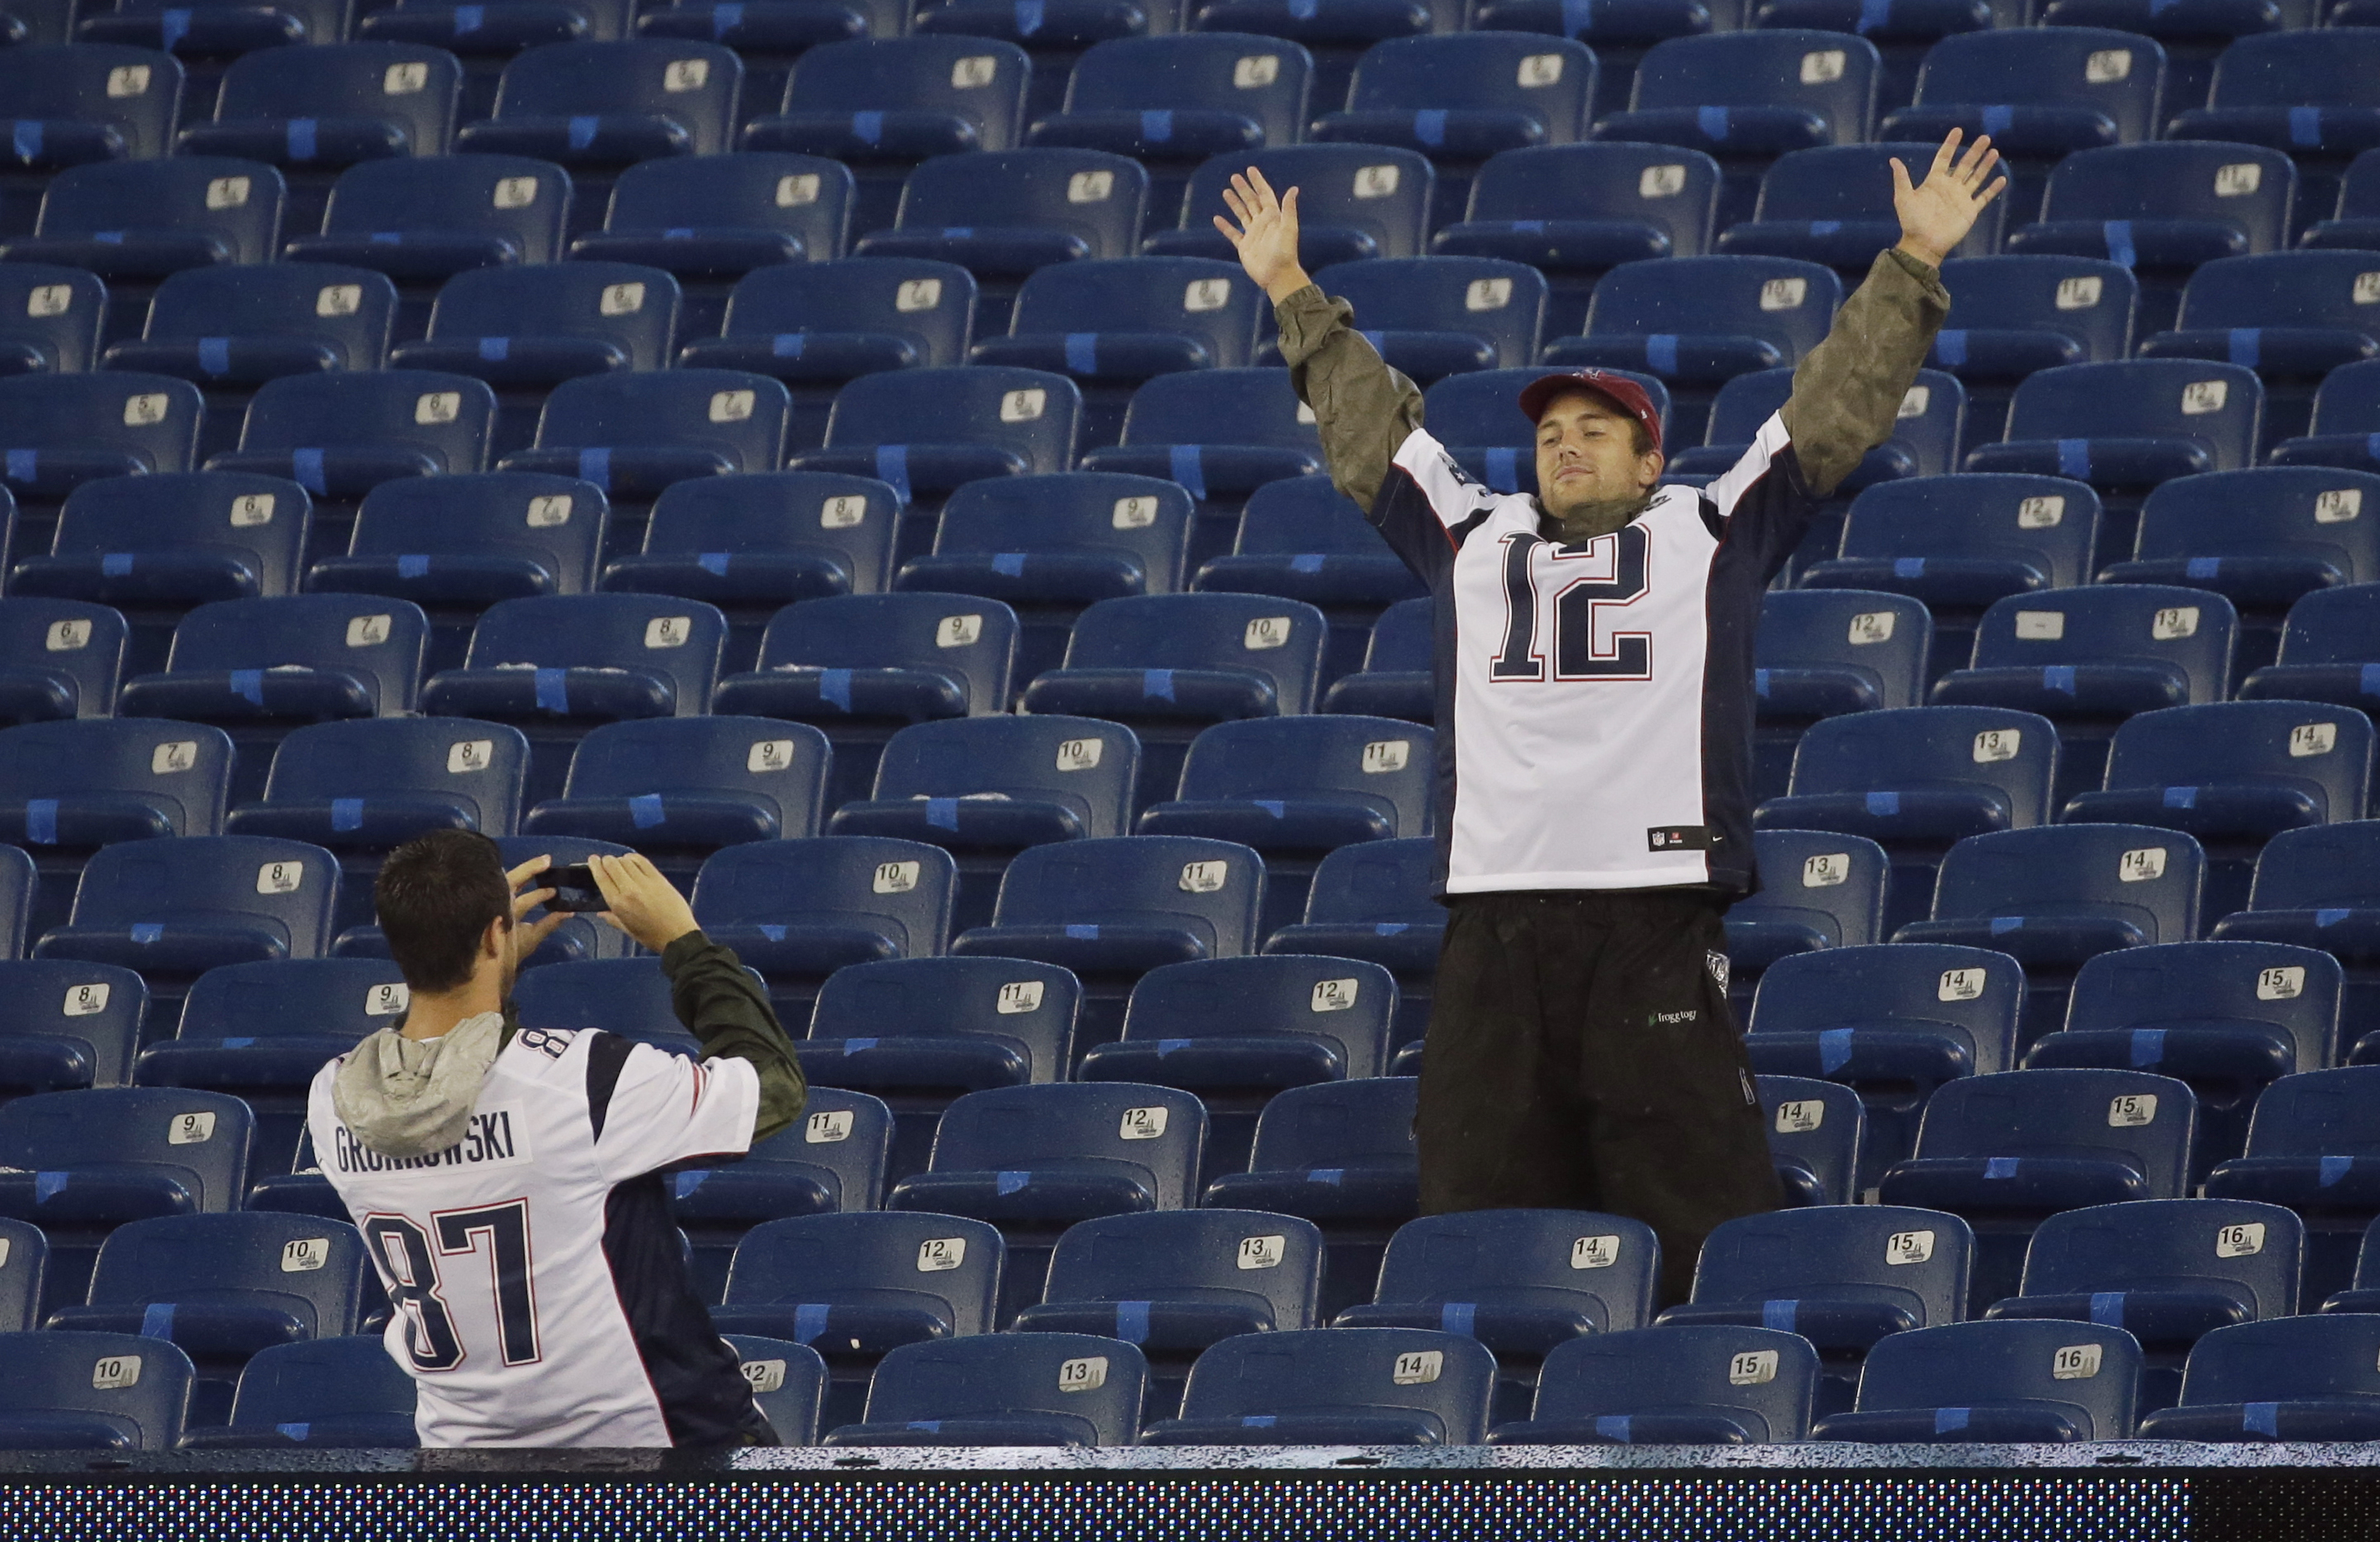 Want to buy Patriots season tickets? It takes nearly 20 years on a